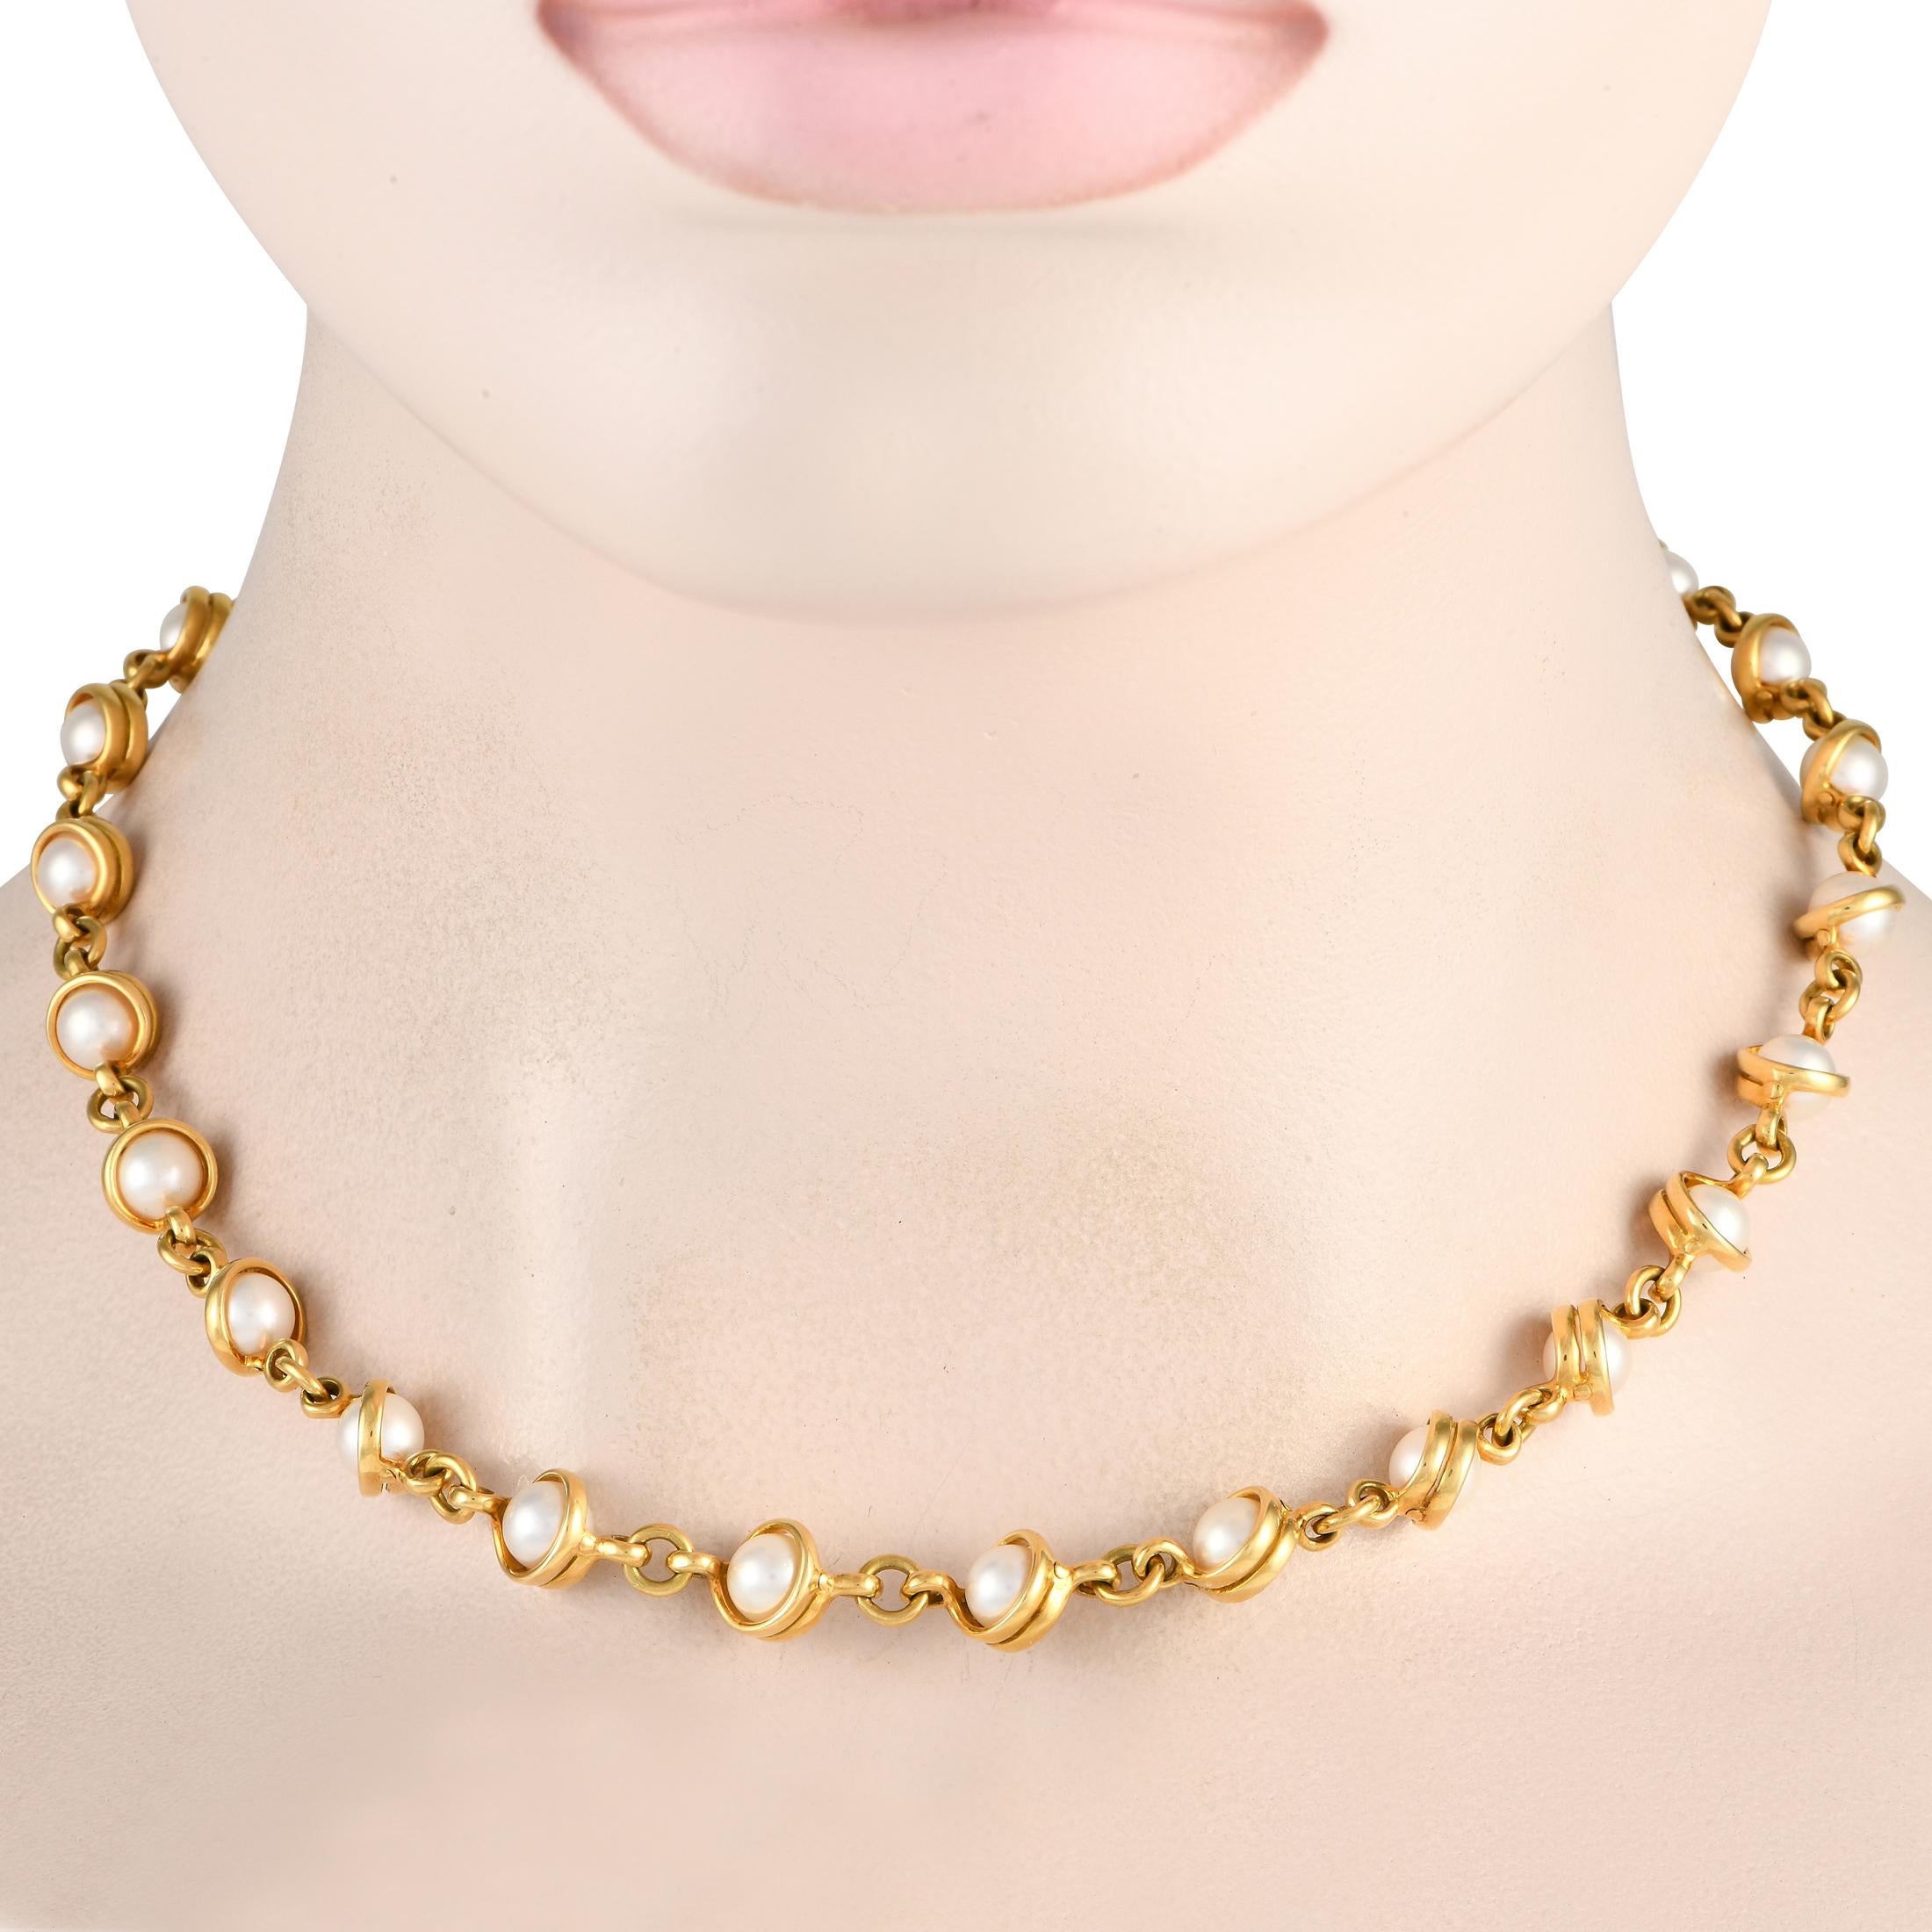 It's easy to find yourself enamored by the vintage yet high-fashion style of this Pomellato necklace. The piece features pearl-carrying links connected together to form a necklace that lays elegantly across the collarbone. The necklace measures 16.5